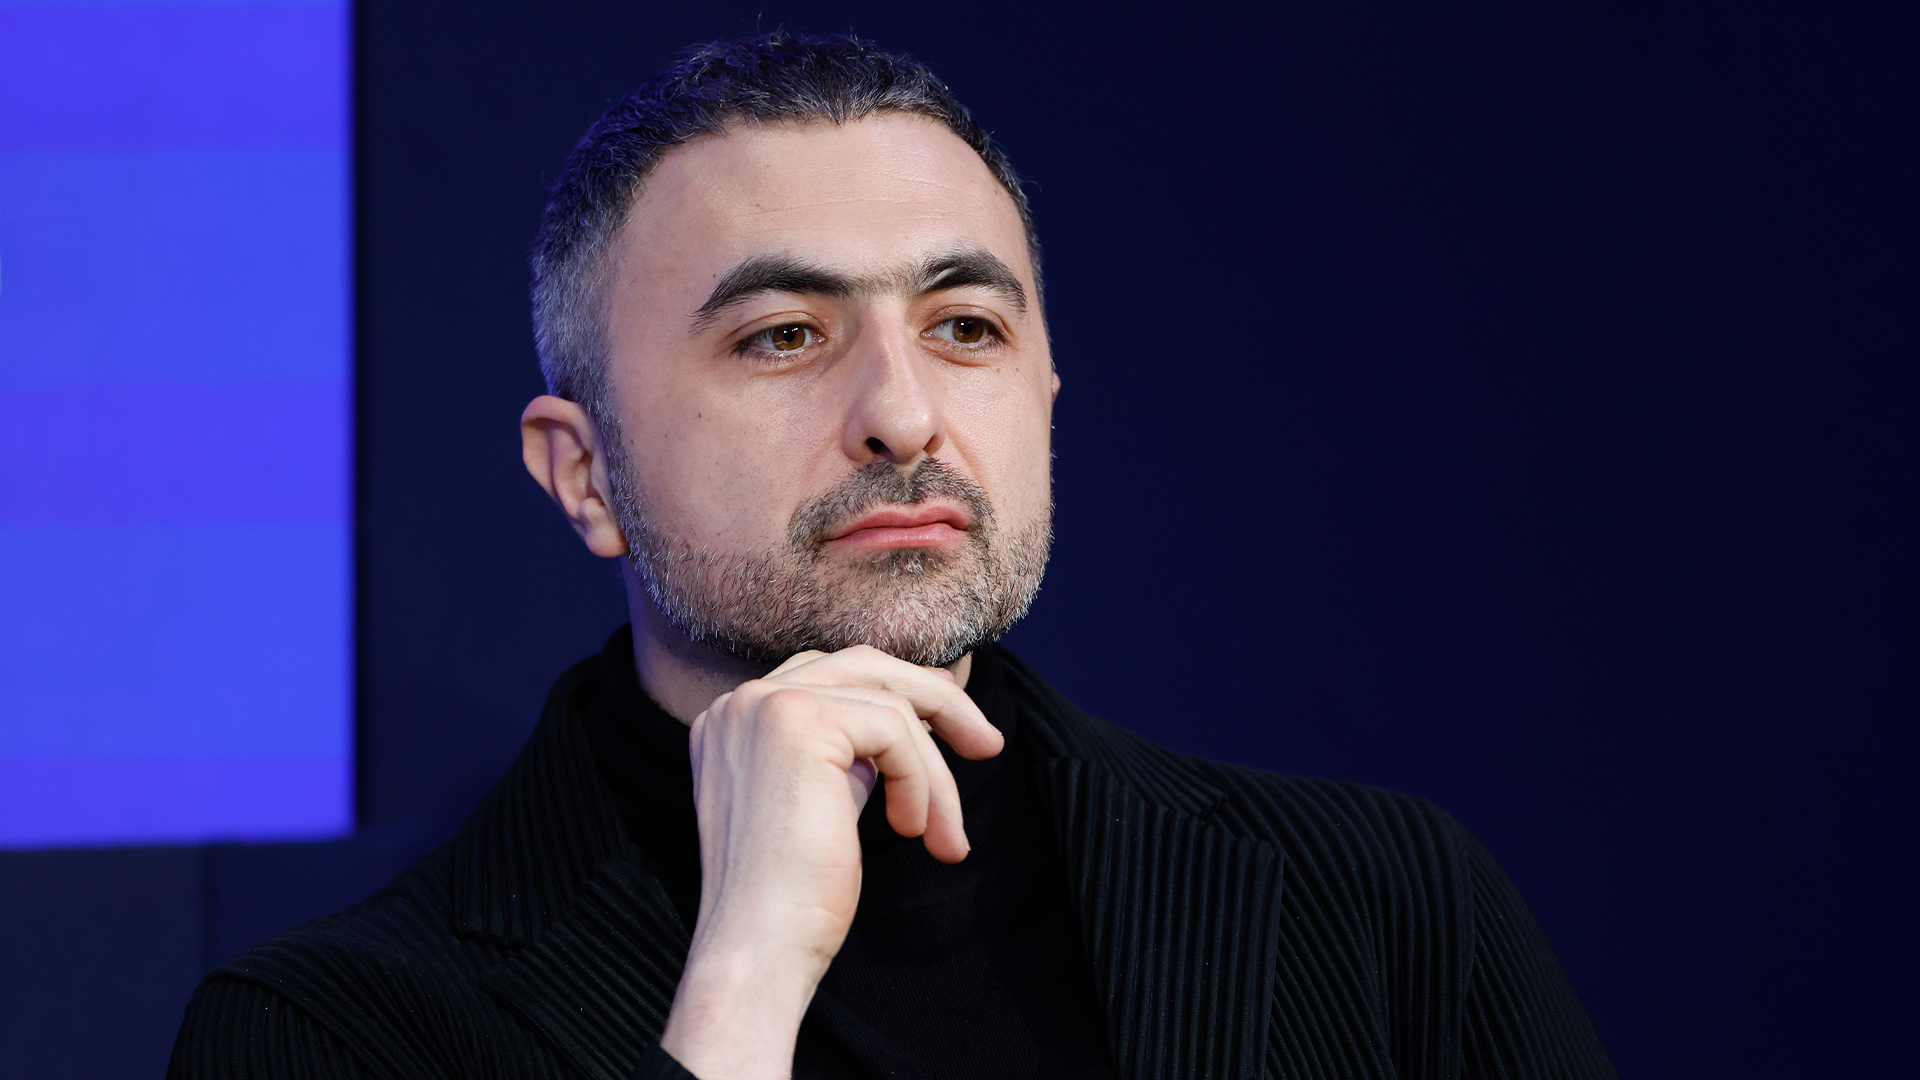 Who is DeepMind co-founder Mustafa Suleyman and why did he join Microsoft?